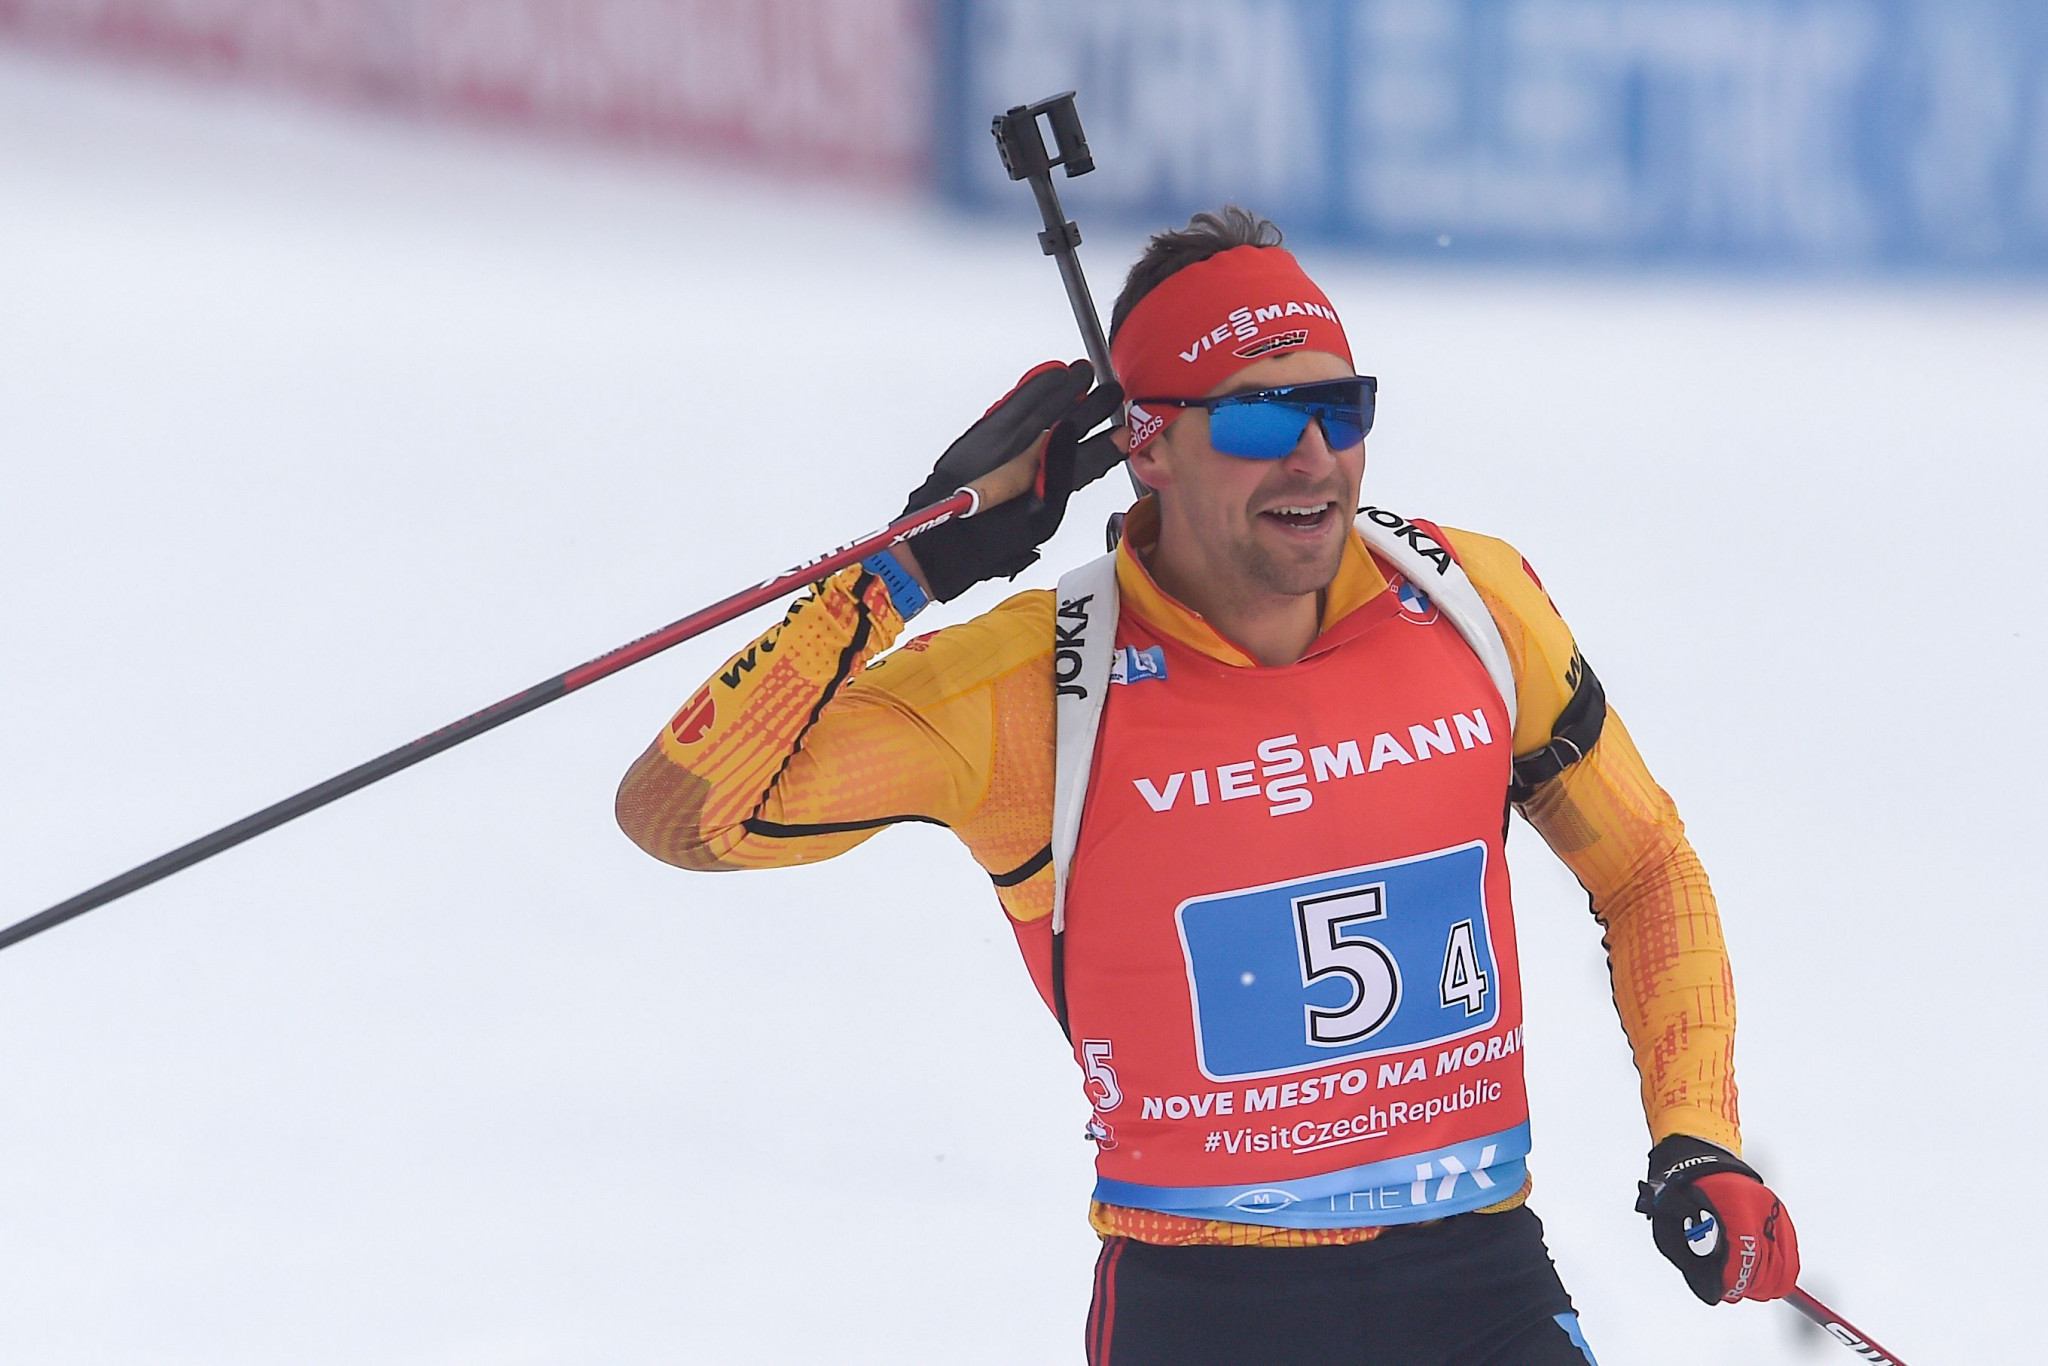 Phillip Nawrath anchored Germany to victory in the men's relay in Nové Město na Moravě ©Getty Images